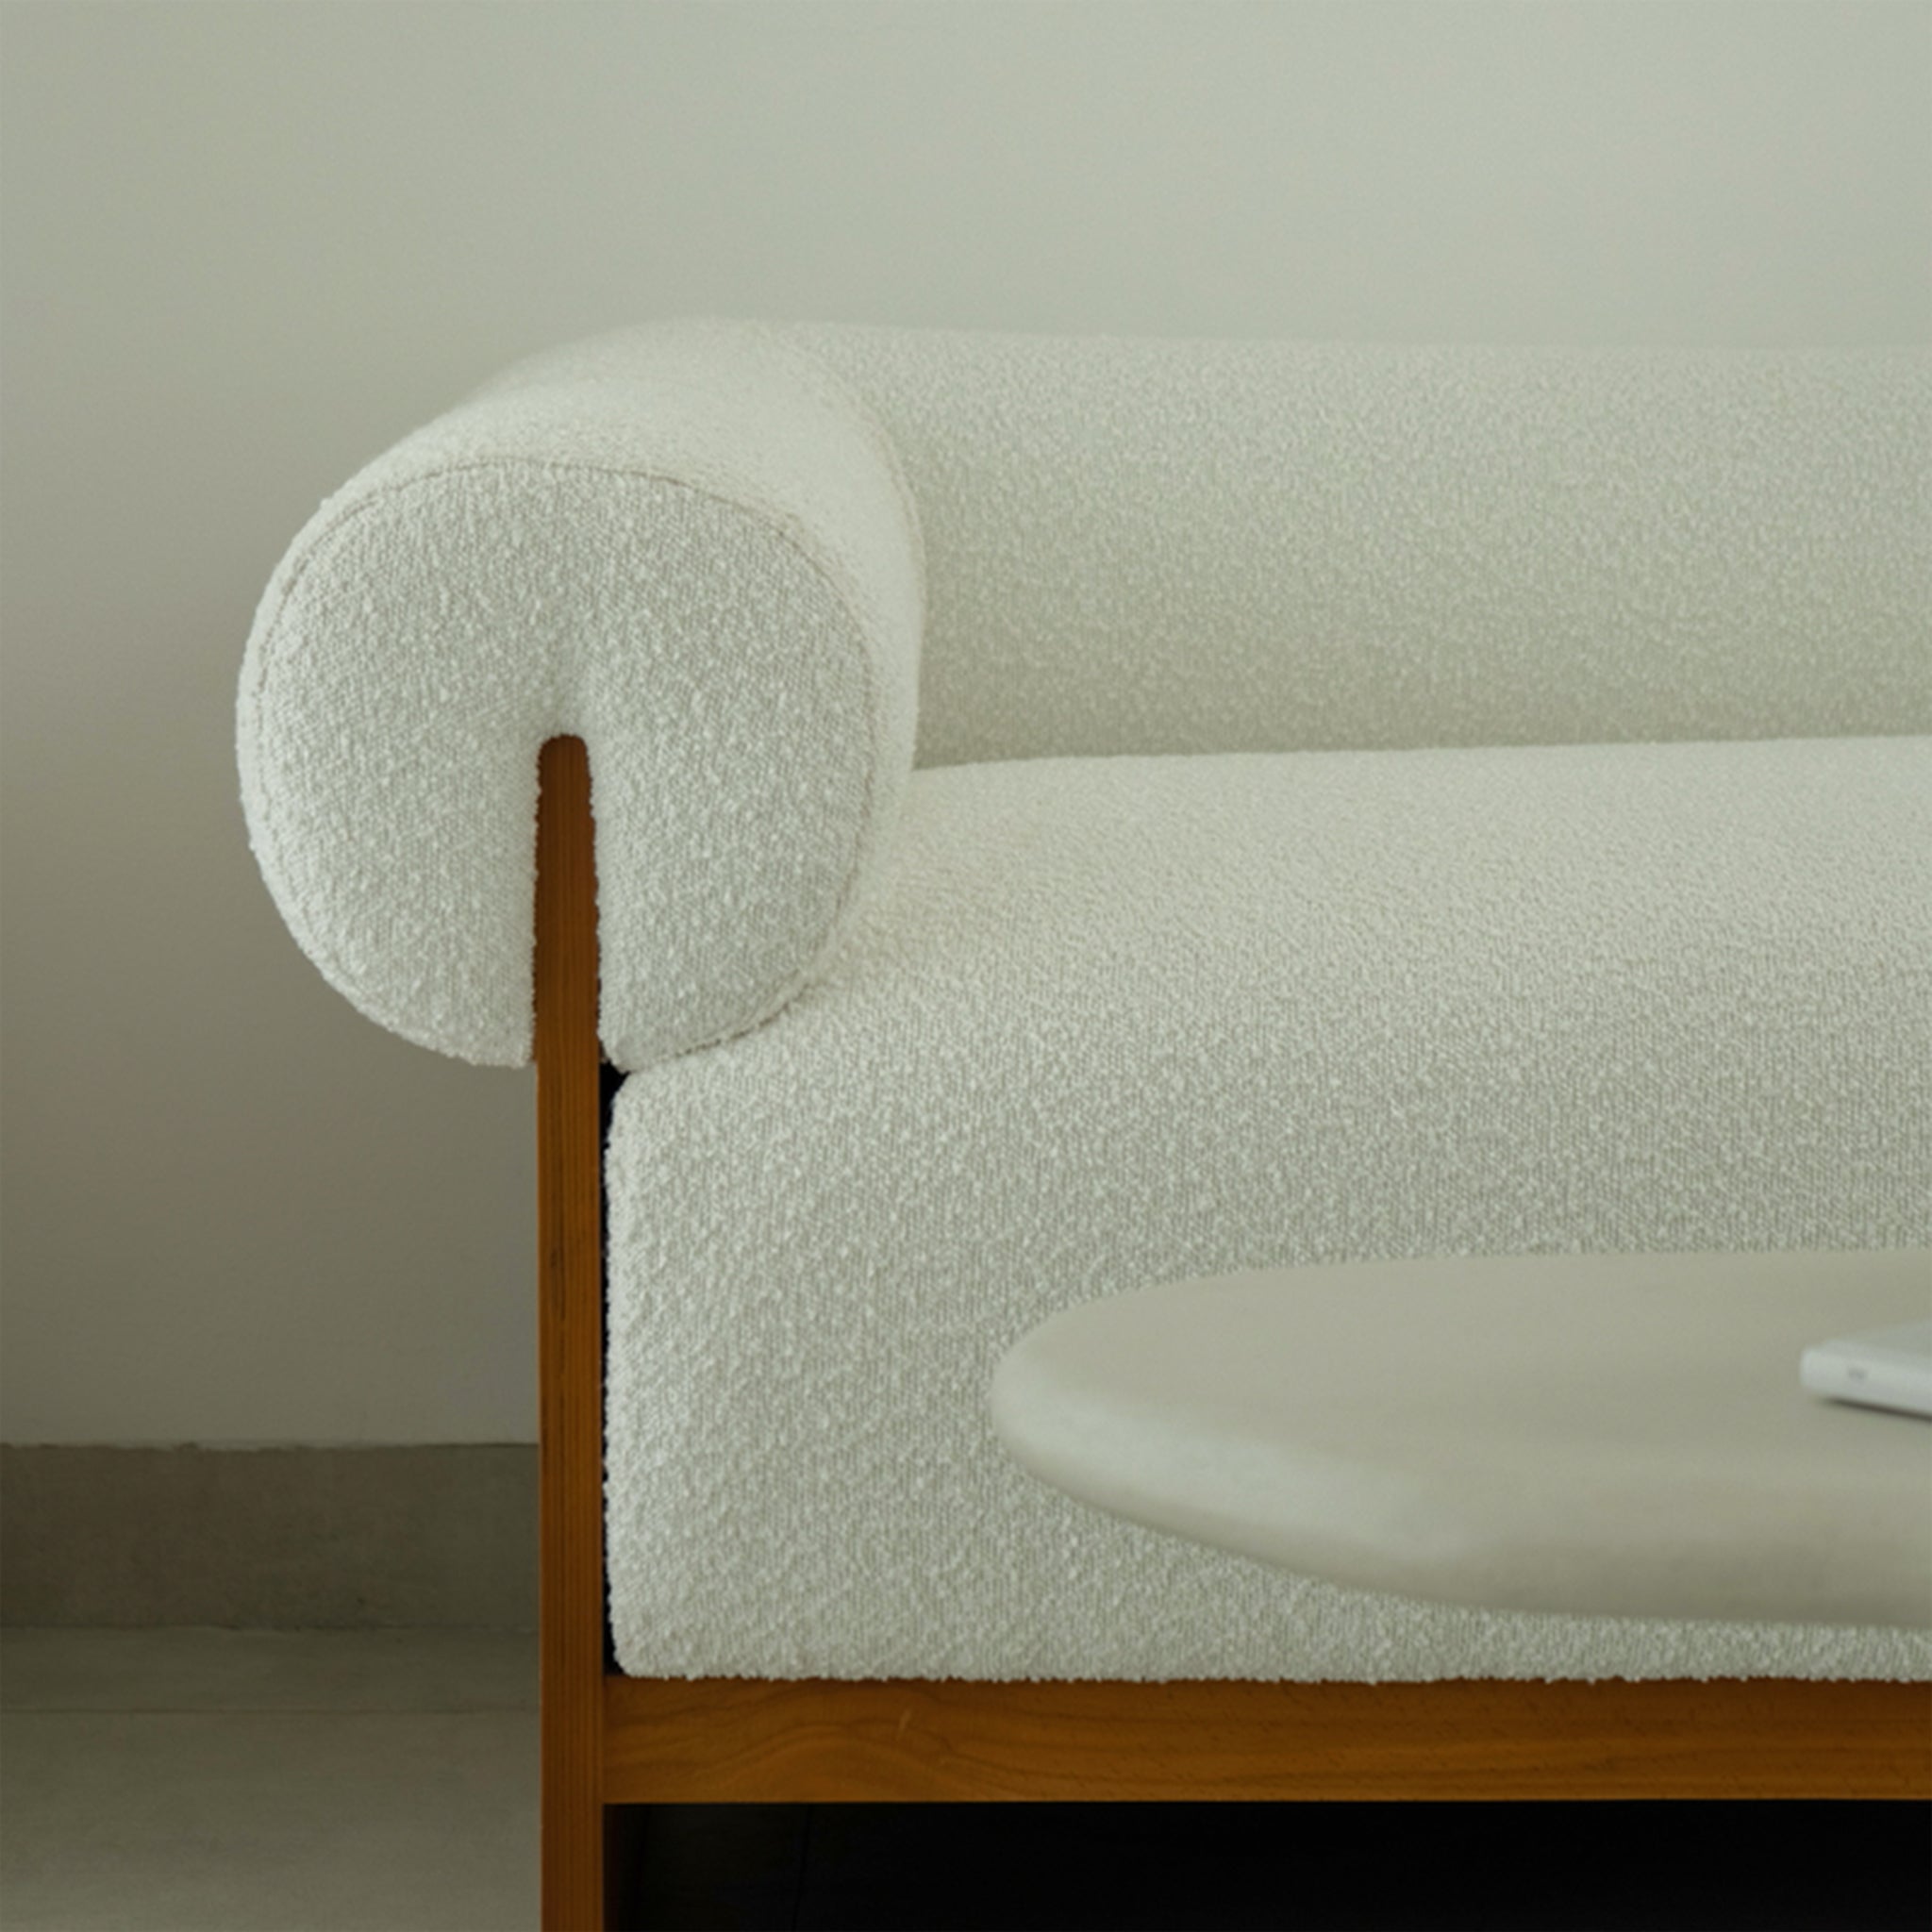 Close-up view of The Devon Chaise featuring its white textured upholstery and wooden frame, highlighting the rolled armrest and modern design elements in a minimalist interior setting.